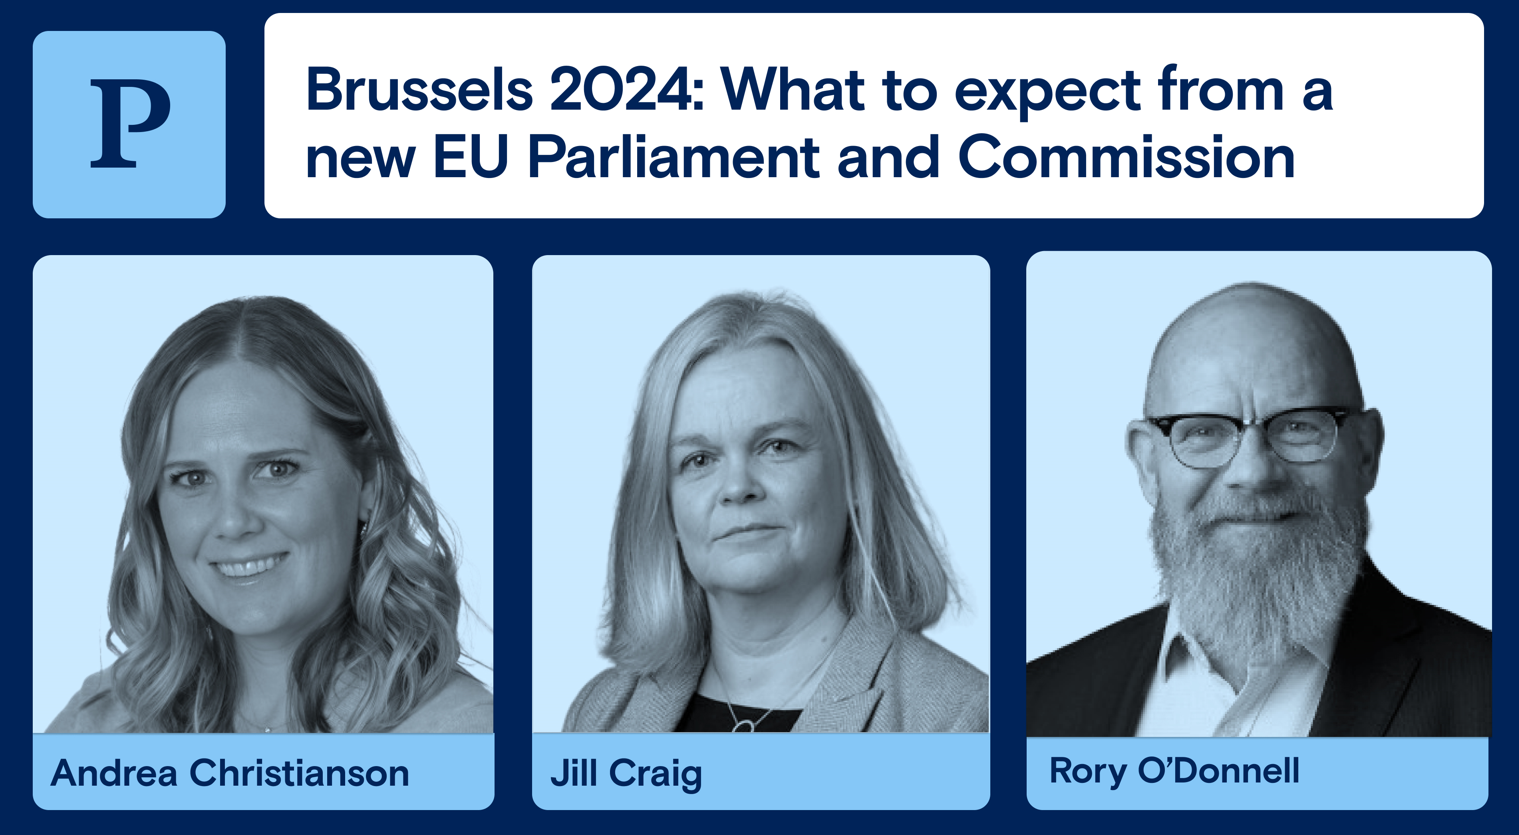 Brussels 2024: What to expect from a new EU Parliament and Commission